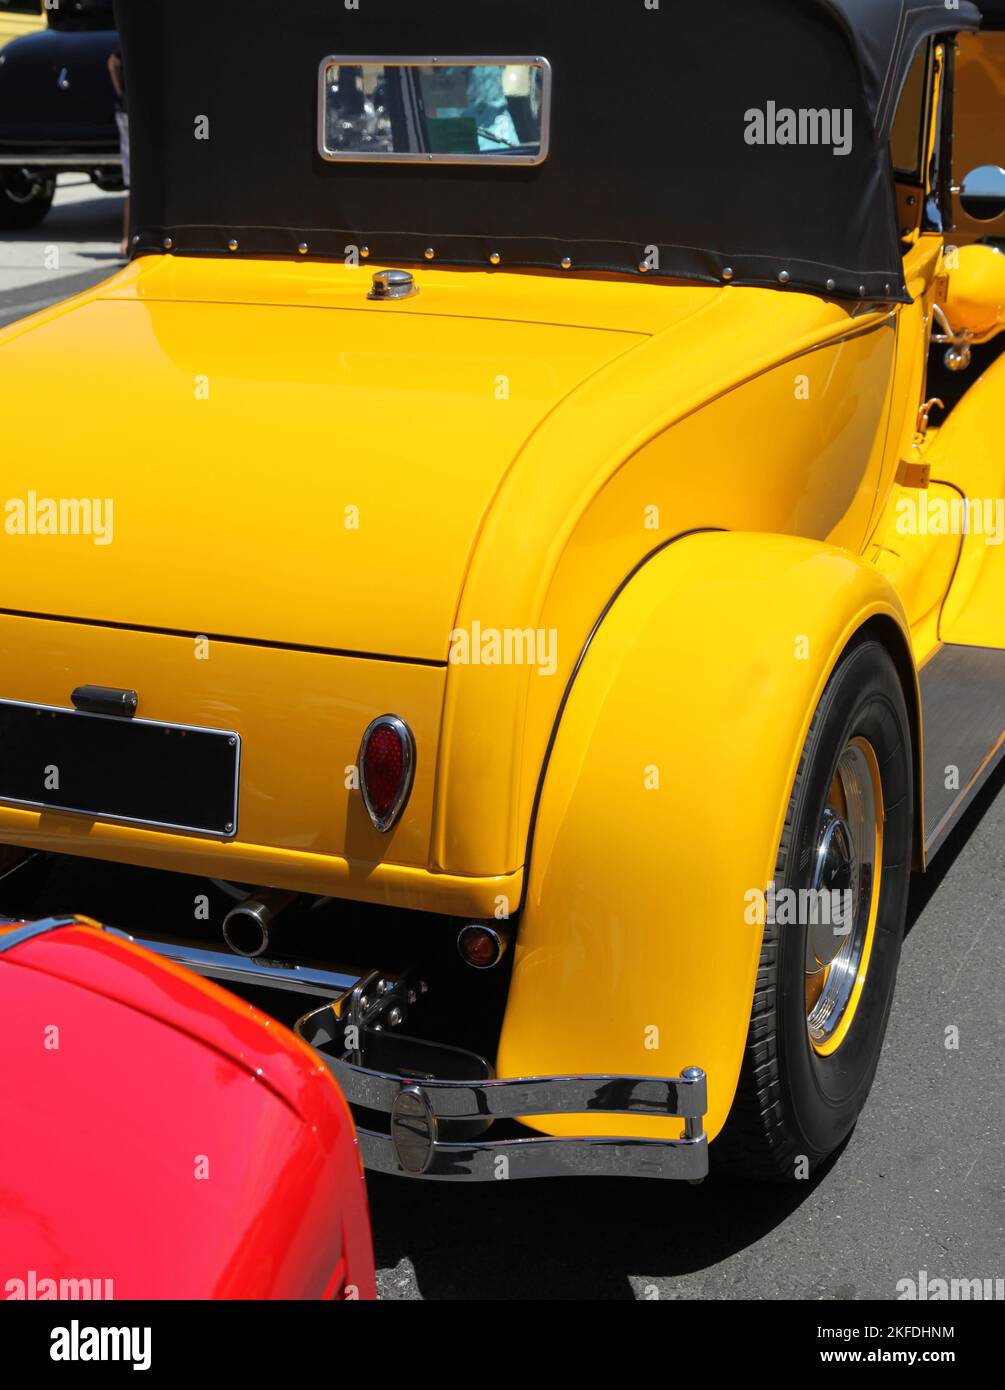 A detail of a rear end of a yellow hotrod car Stock Photo